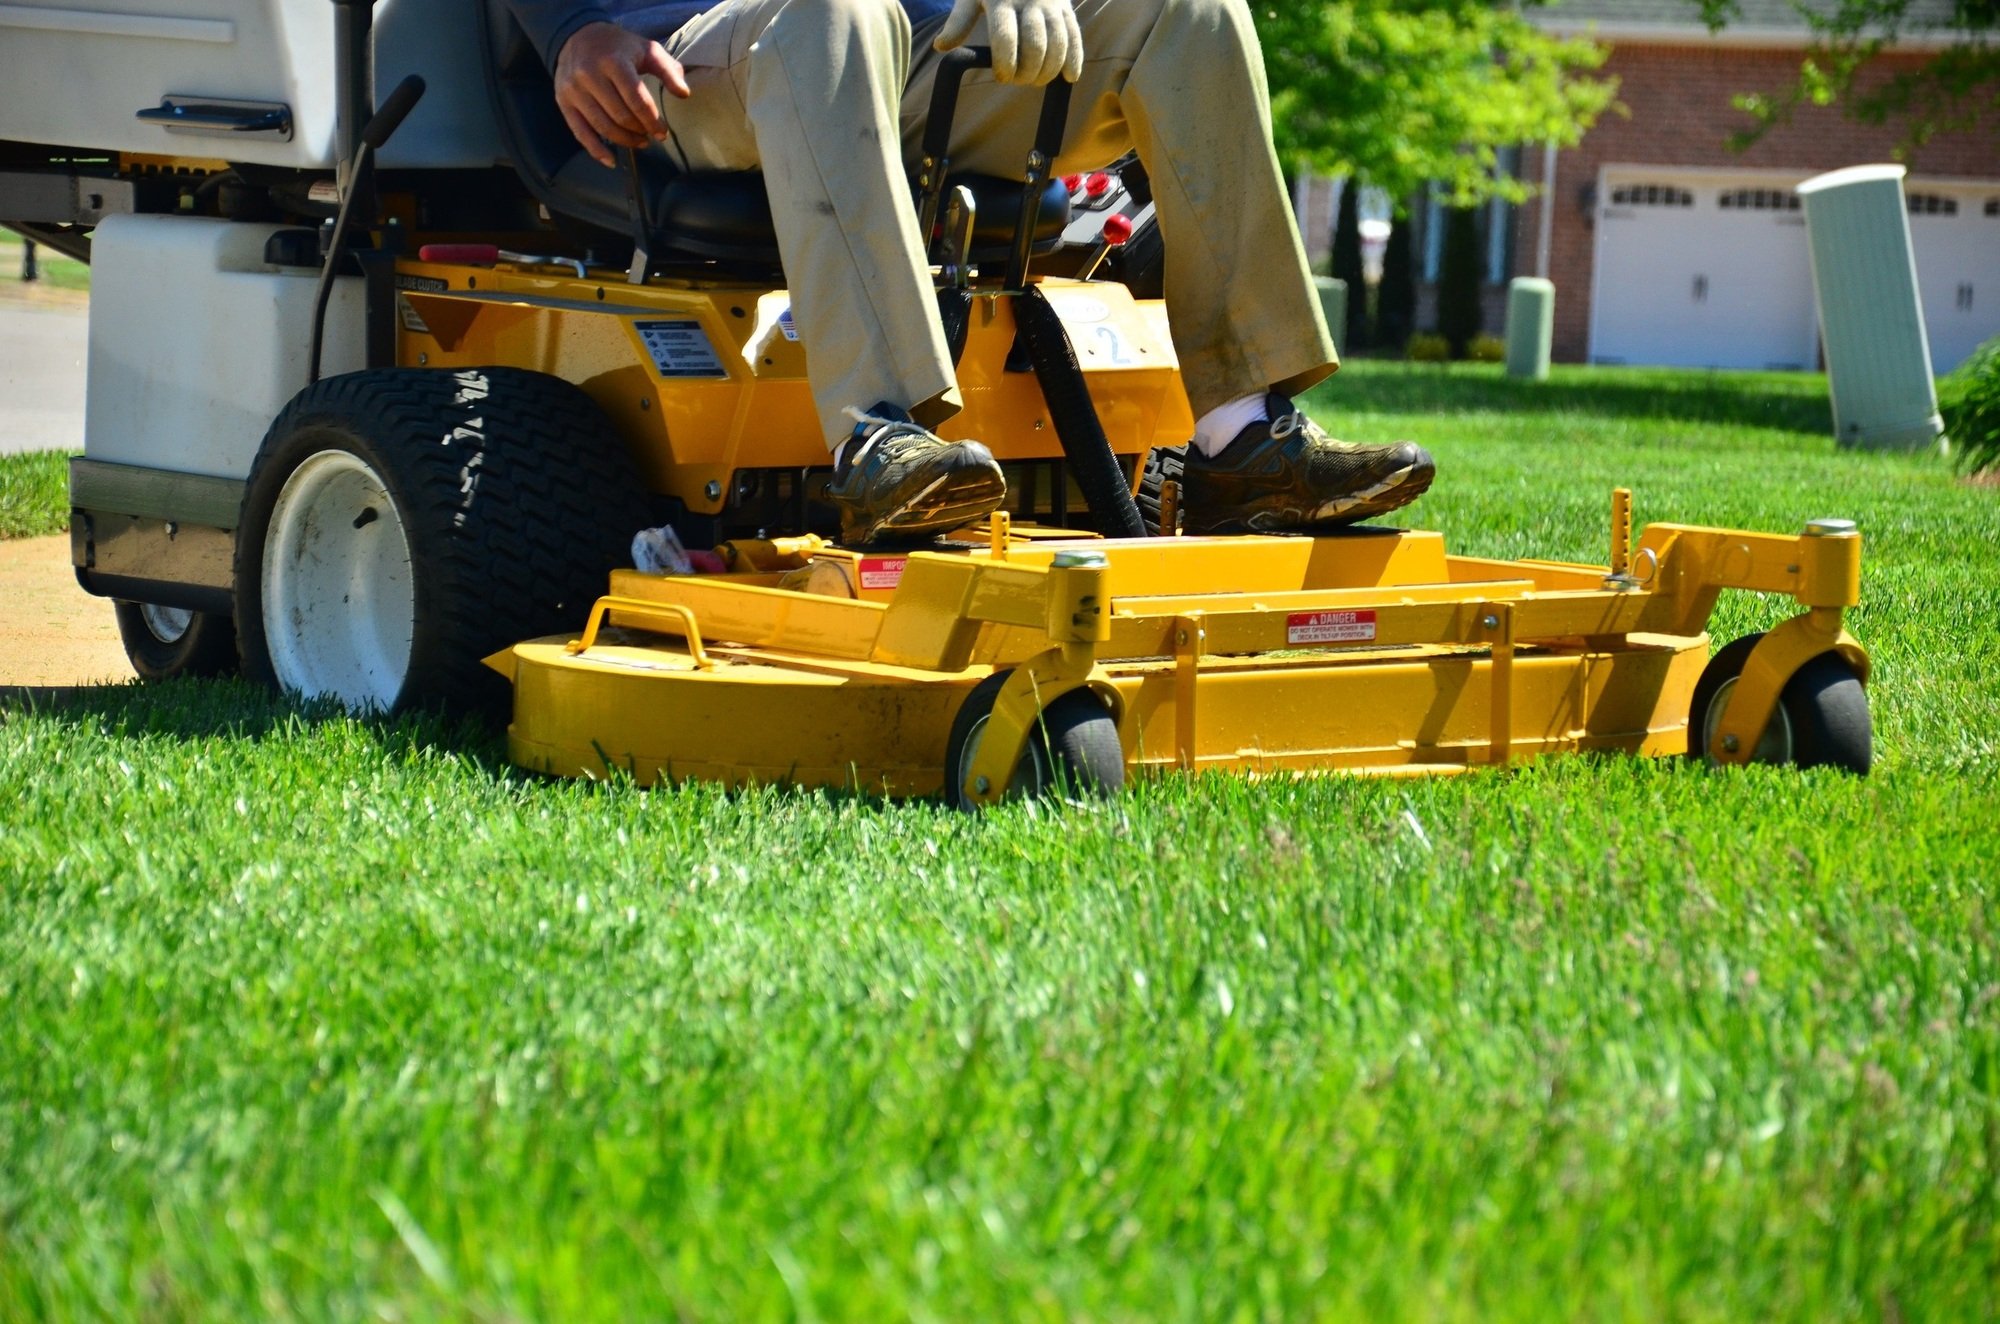 How to Find the Best Lawn Care Company